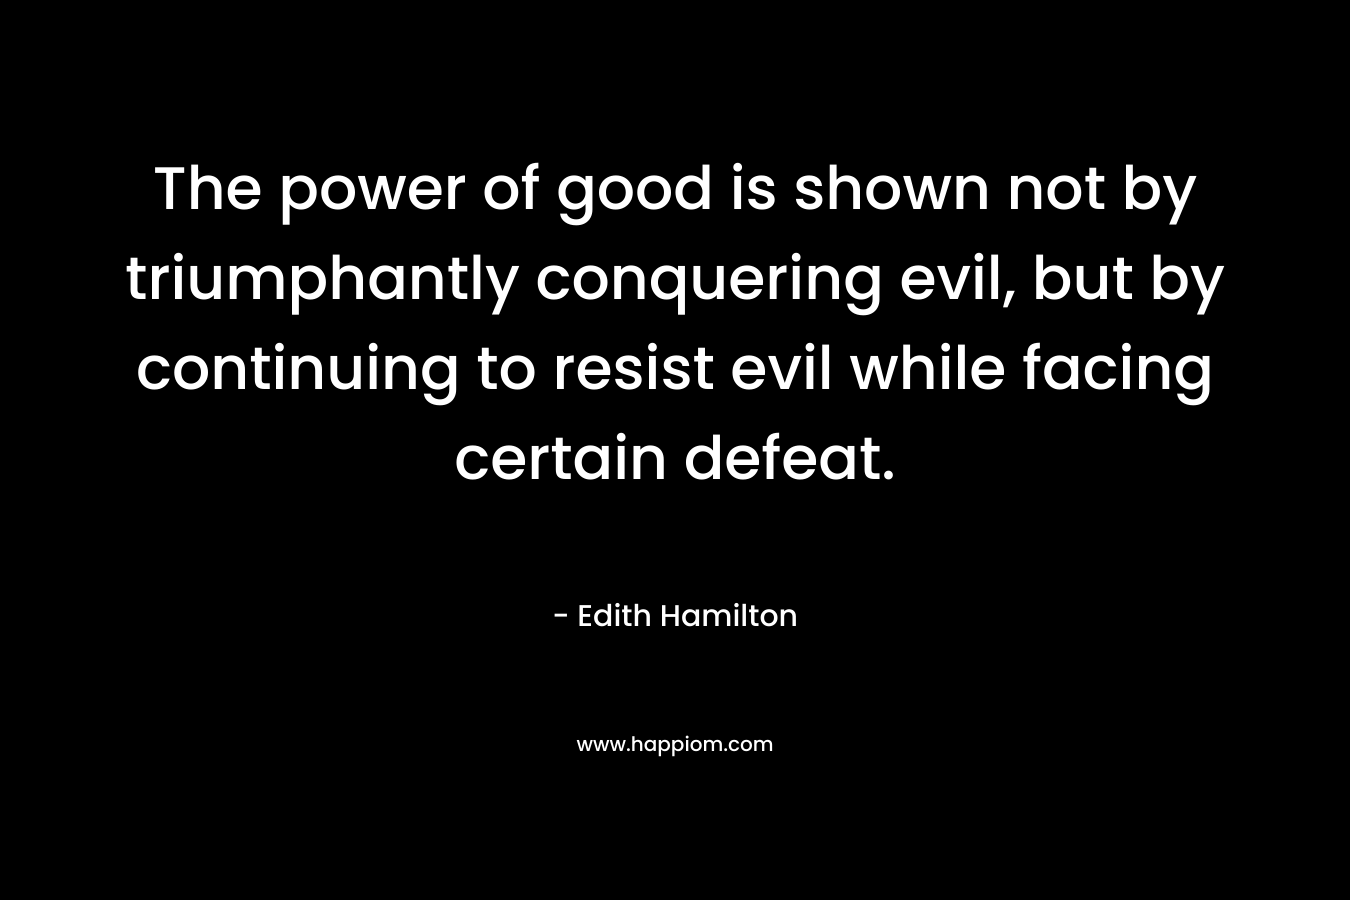 The power of good is shown not by triumphantly conquering evil, but by continuing to resist evil while facing certain defeat.